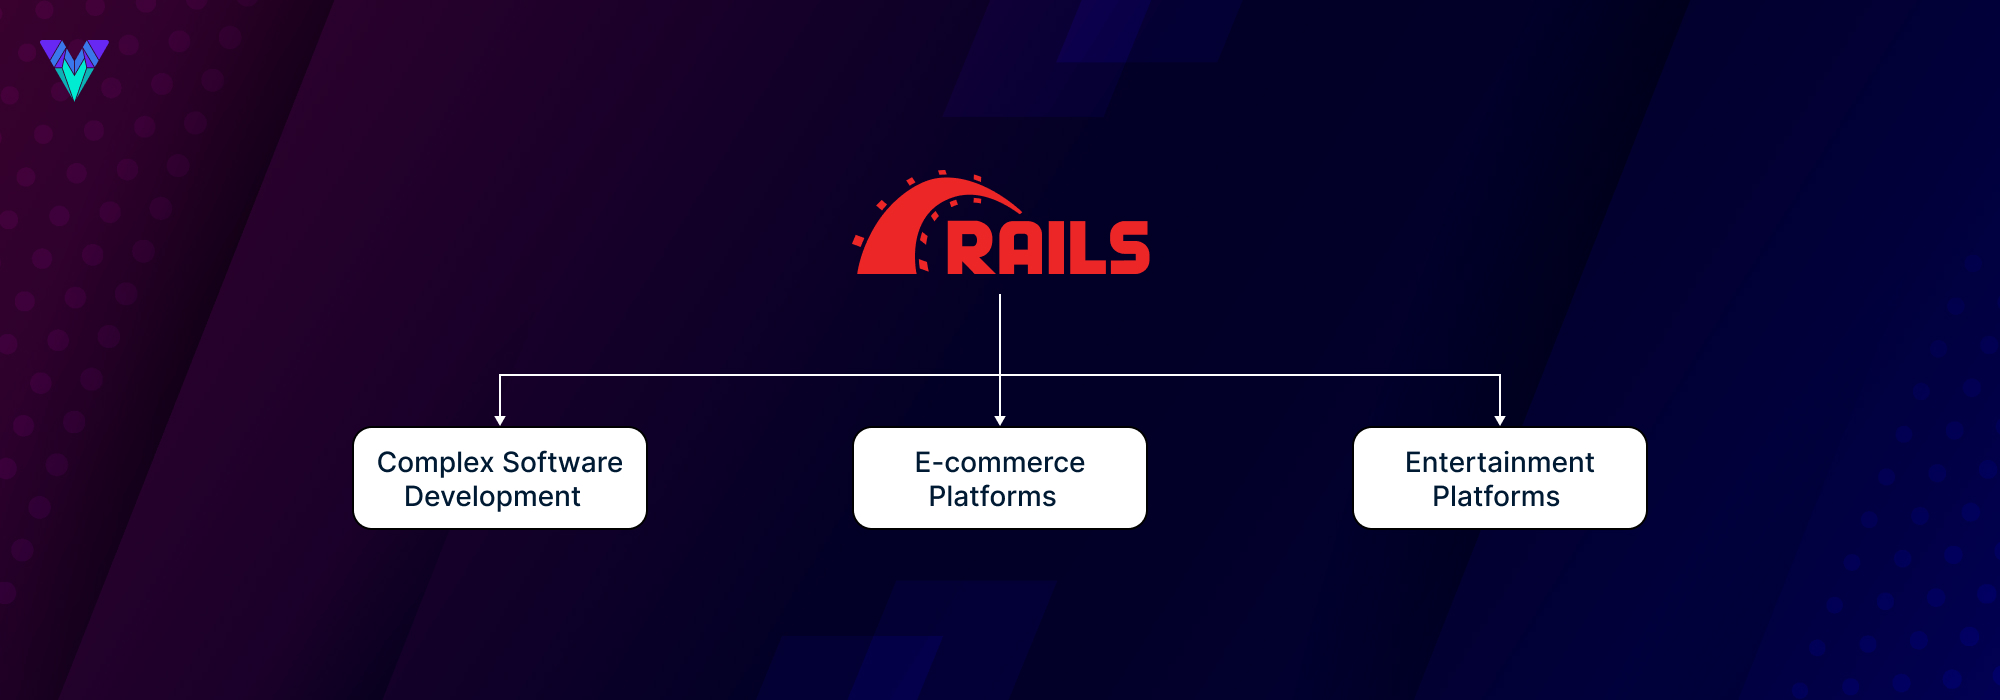 Use Cases For Ruby On Rails